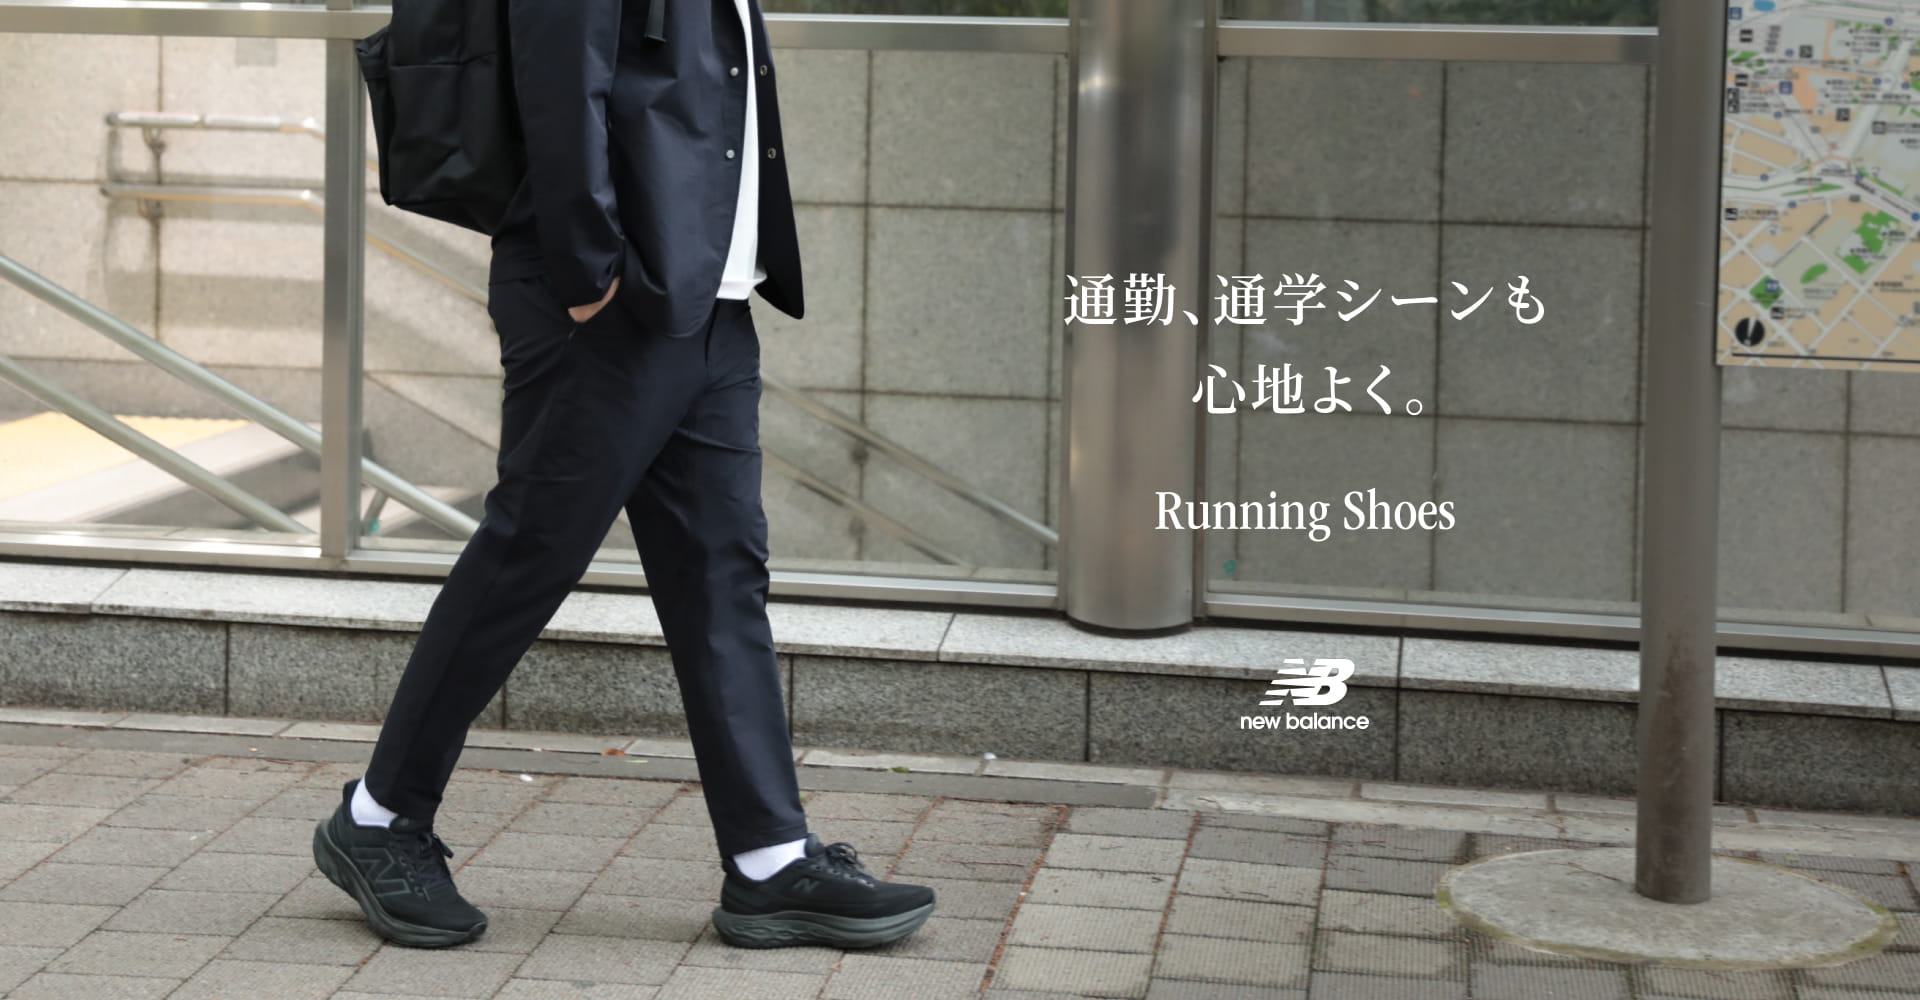 New Balance. Running Shoes. 通勤、通学シーンも心地よく。